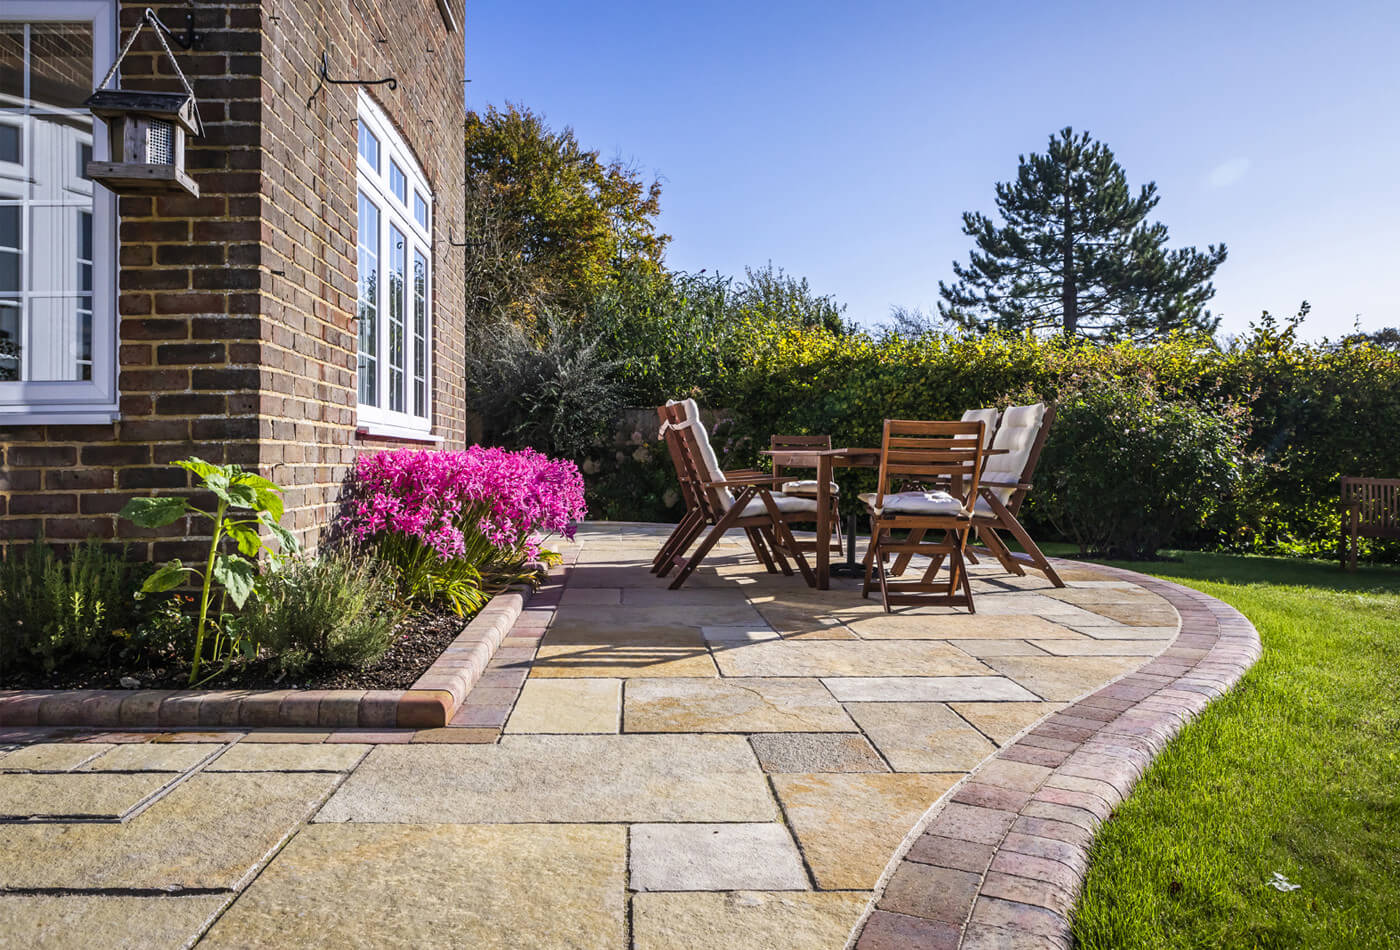 Paving Slabs To Transform Your Outdoor Space: 5 Design Ideas